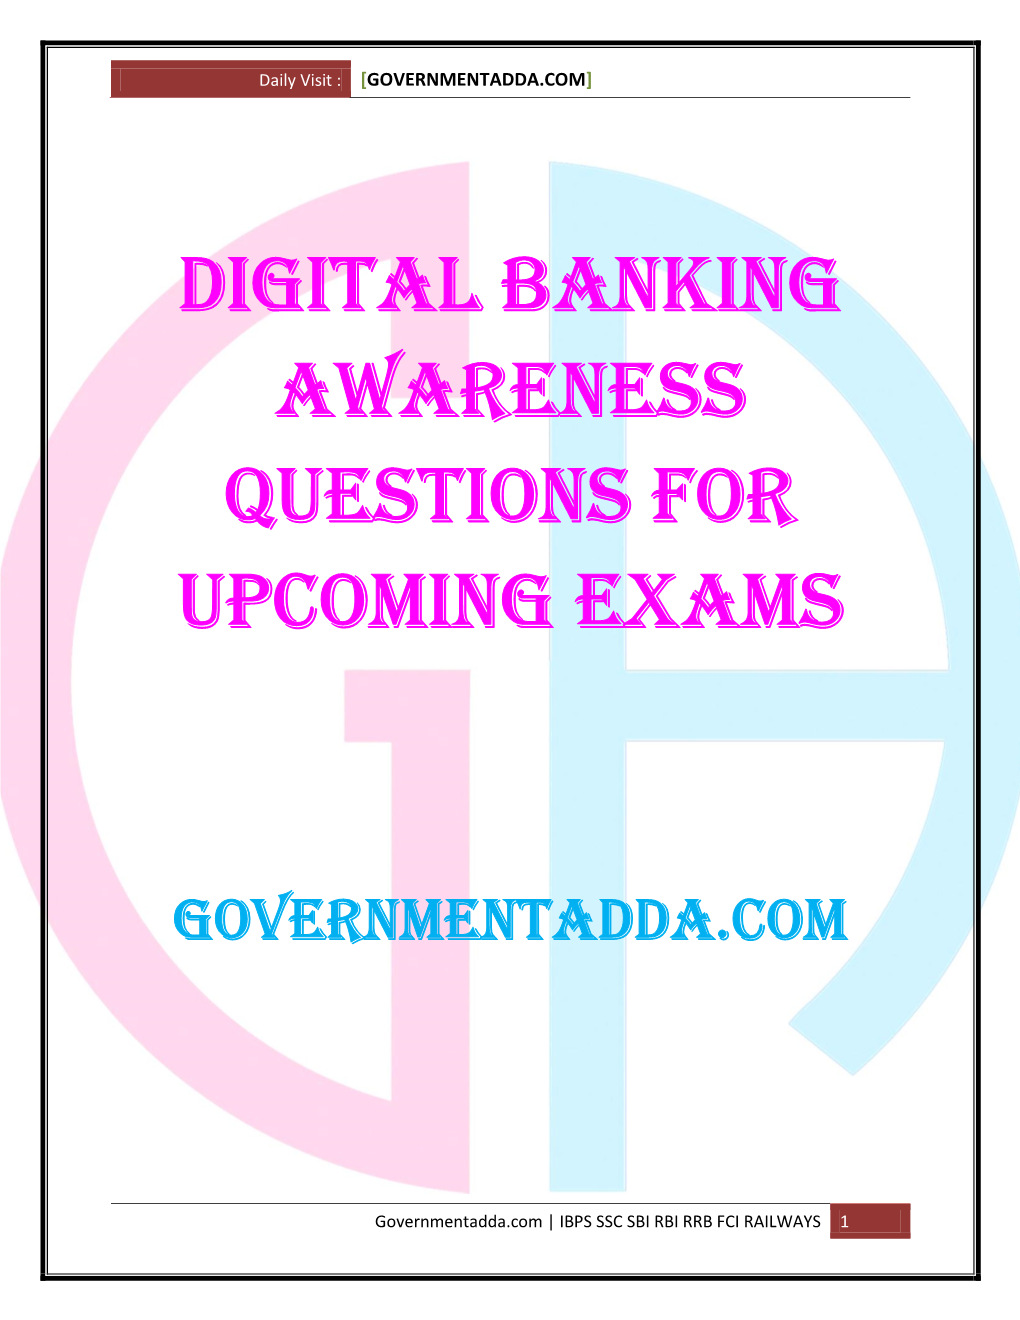 Digital Banking Awareness Questions for Upcoming Exams